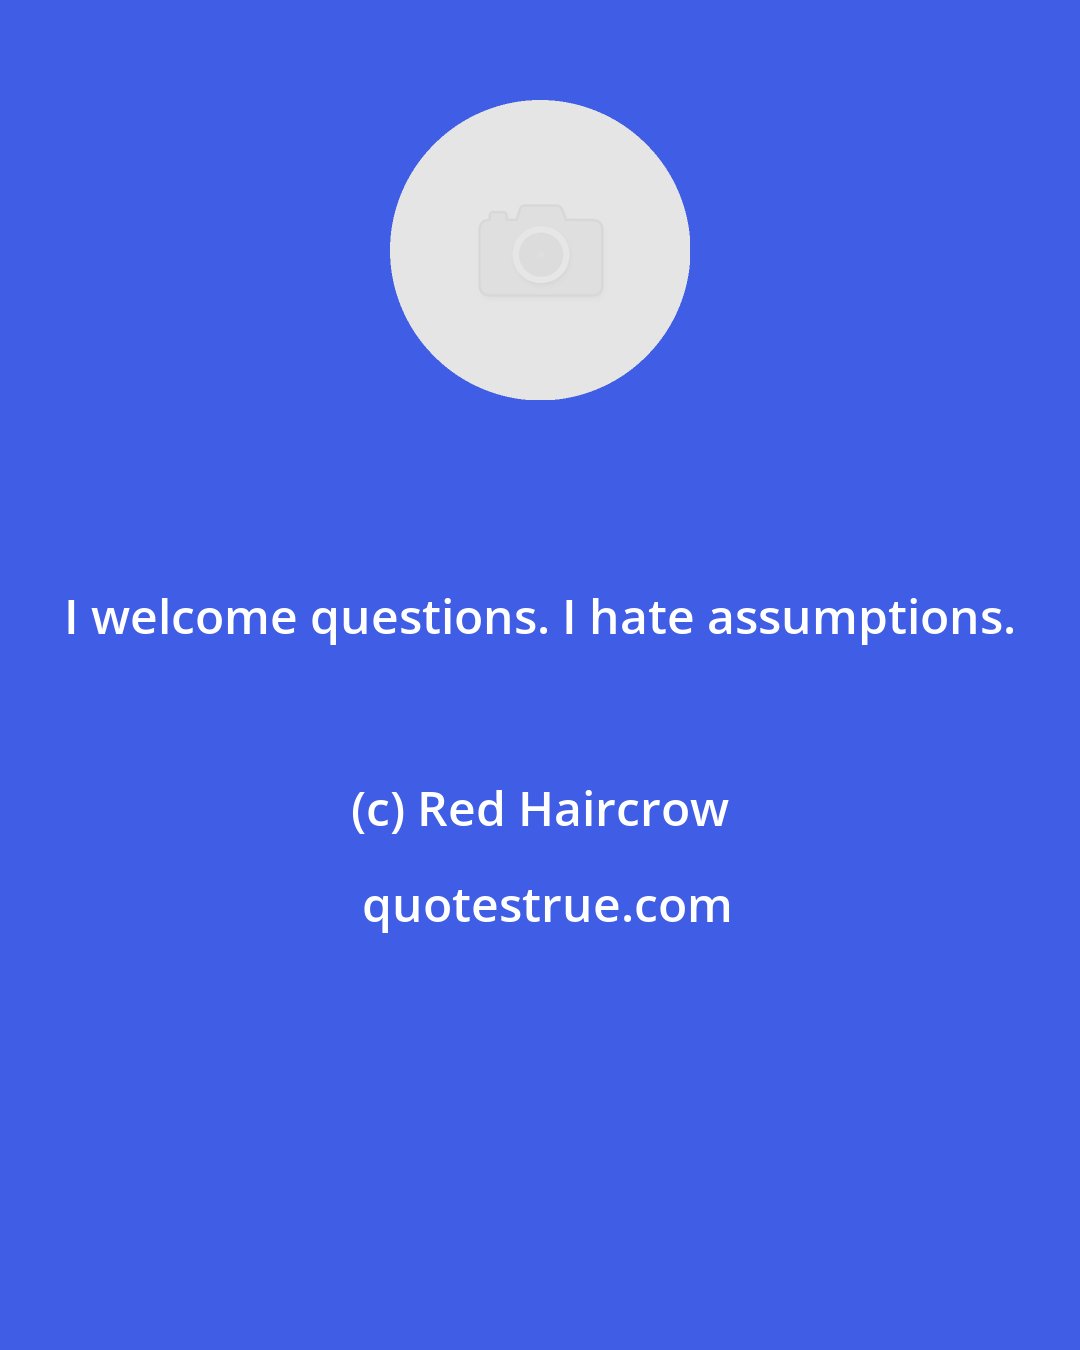 Red Haircrow: I welcome questions. I hate assumptions.